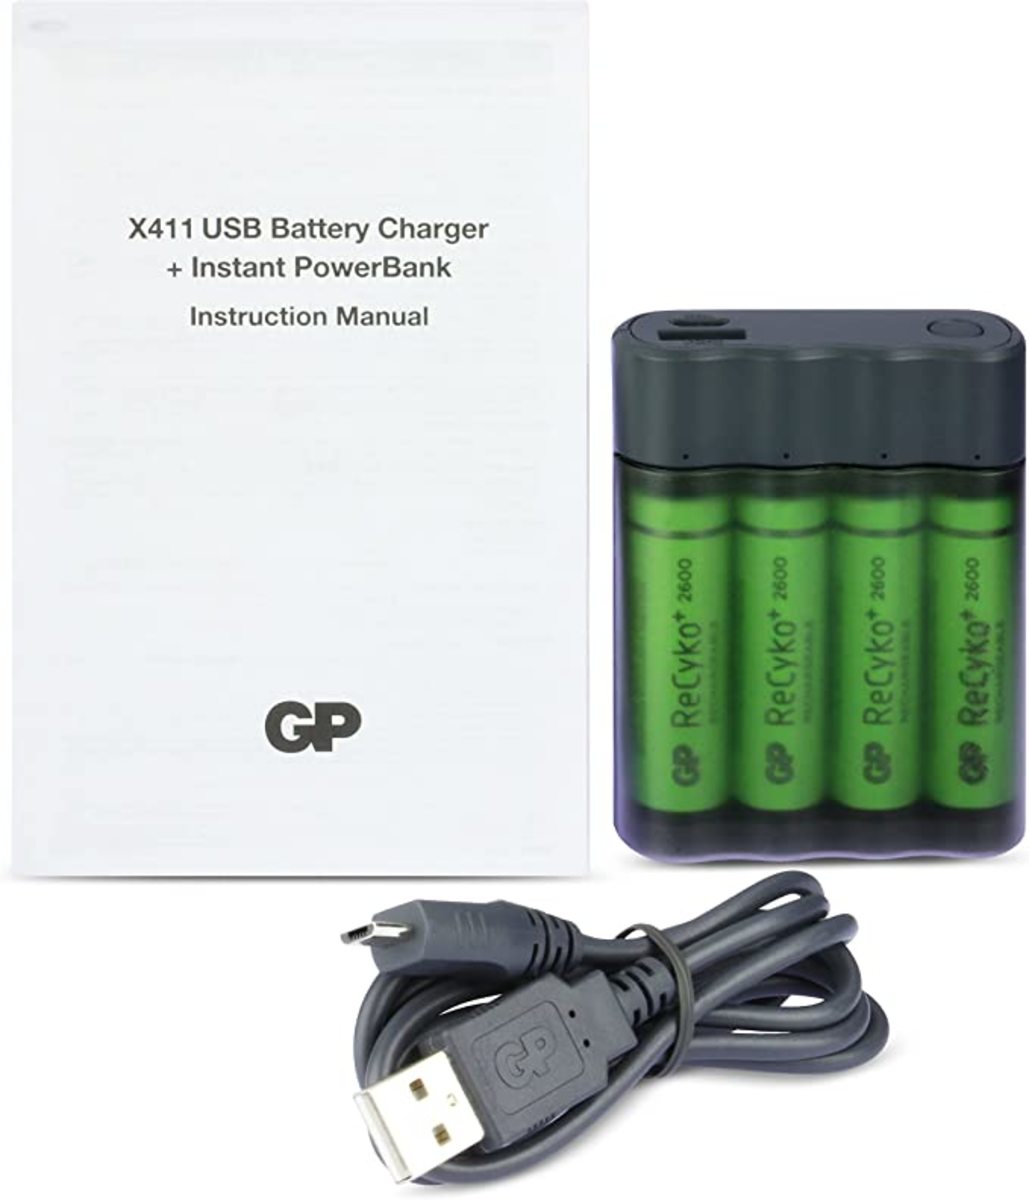 A Review of Multipurpose Battery Chargers